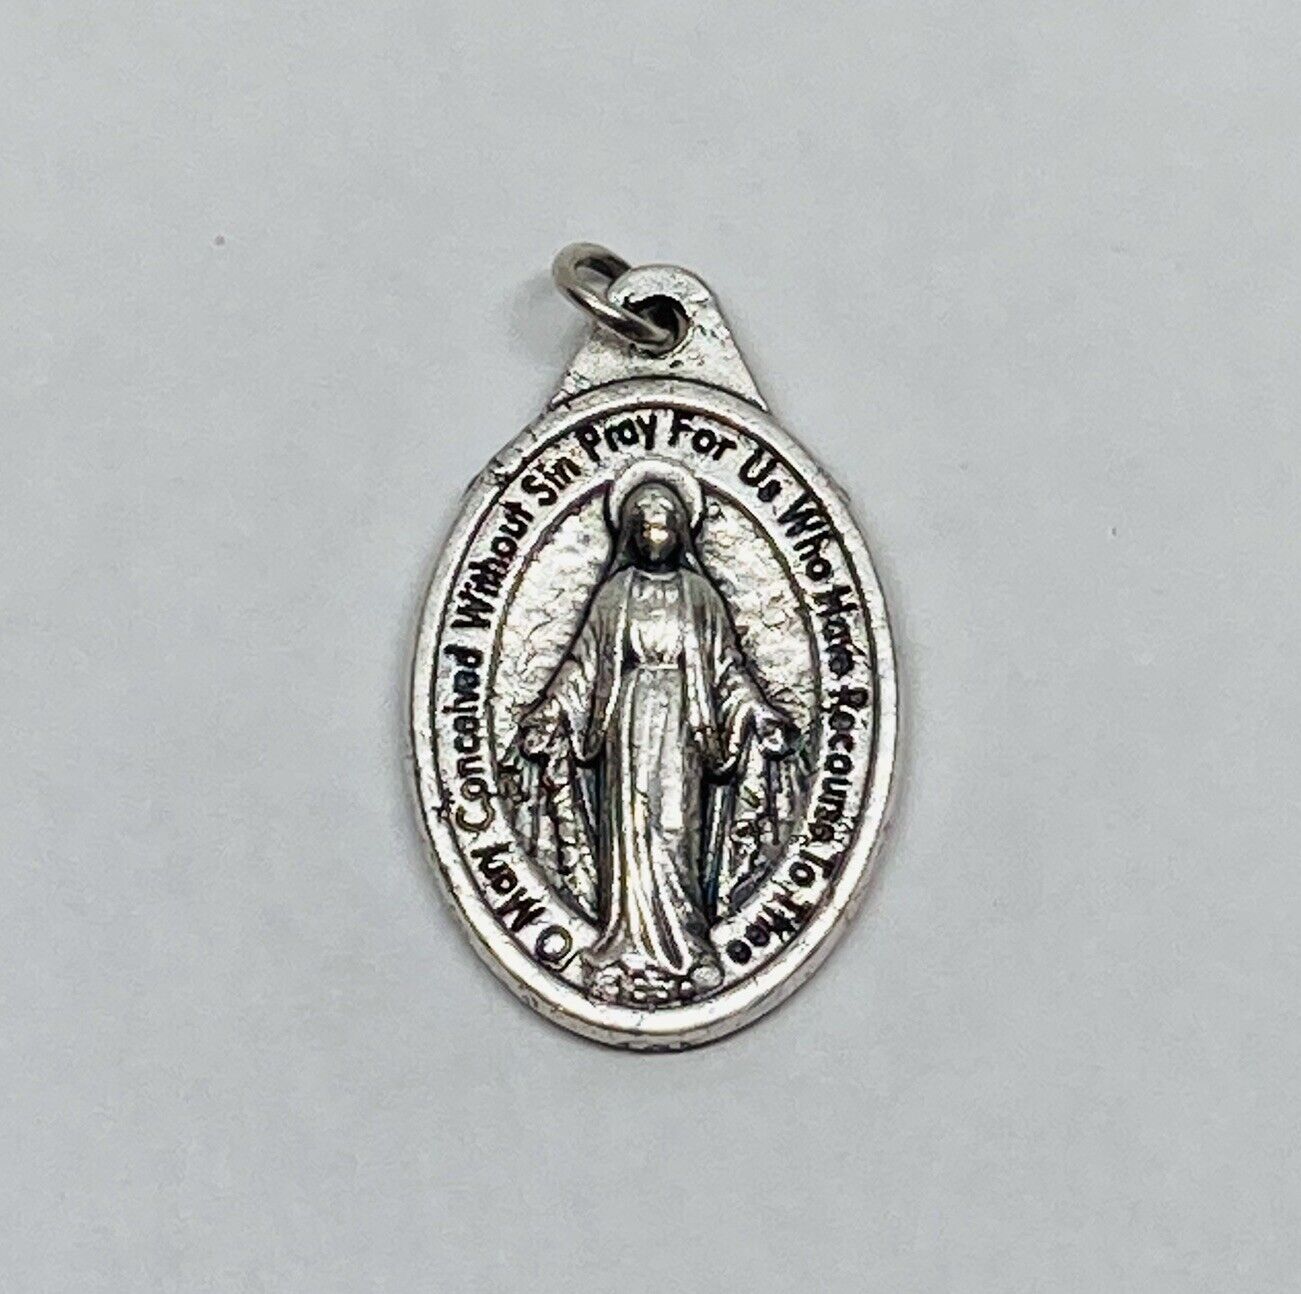 Vintage 1970s Mary Concieved Without Sin Pray For Us Pendant Medal Italy Made 18